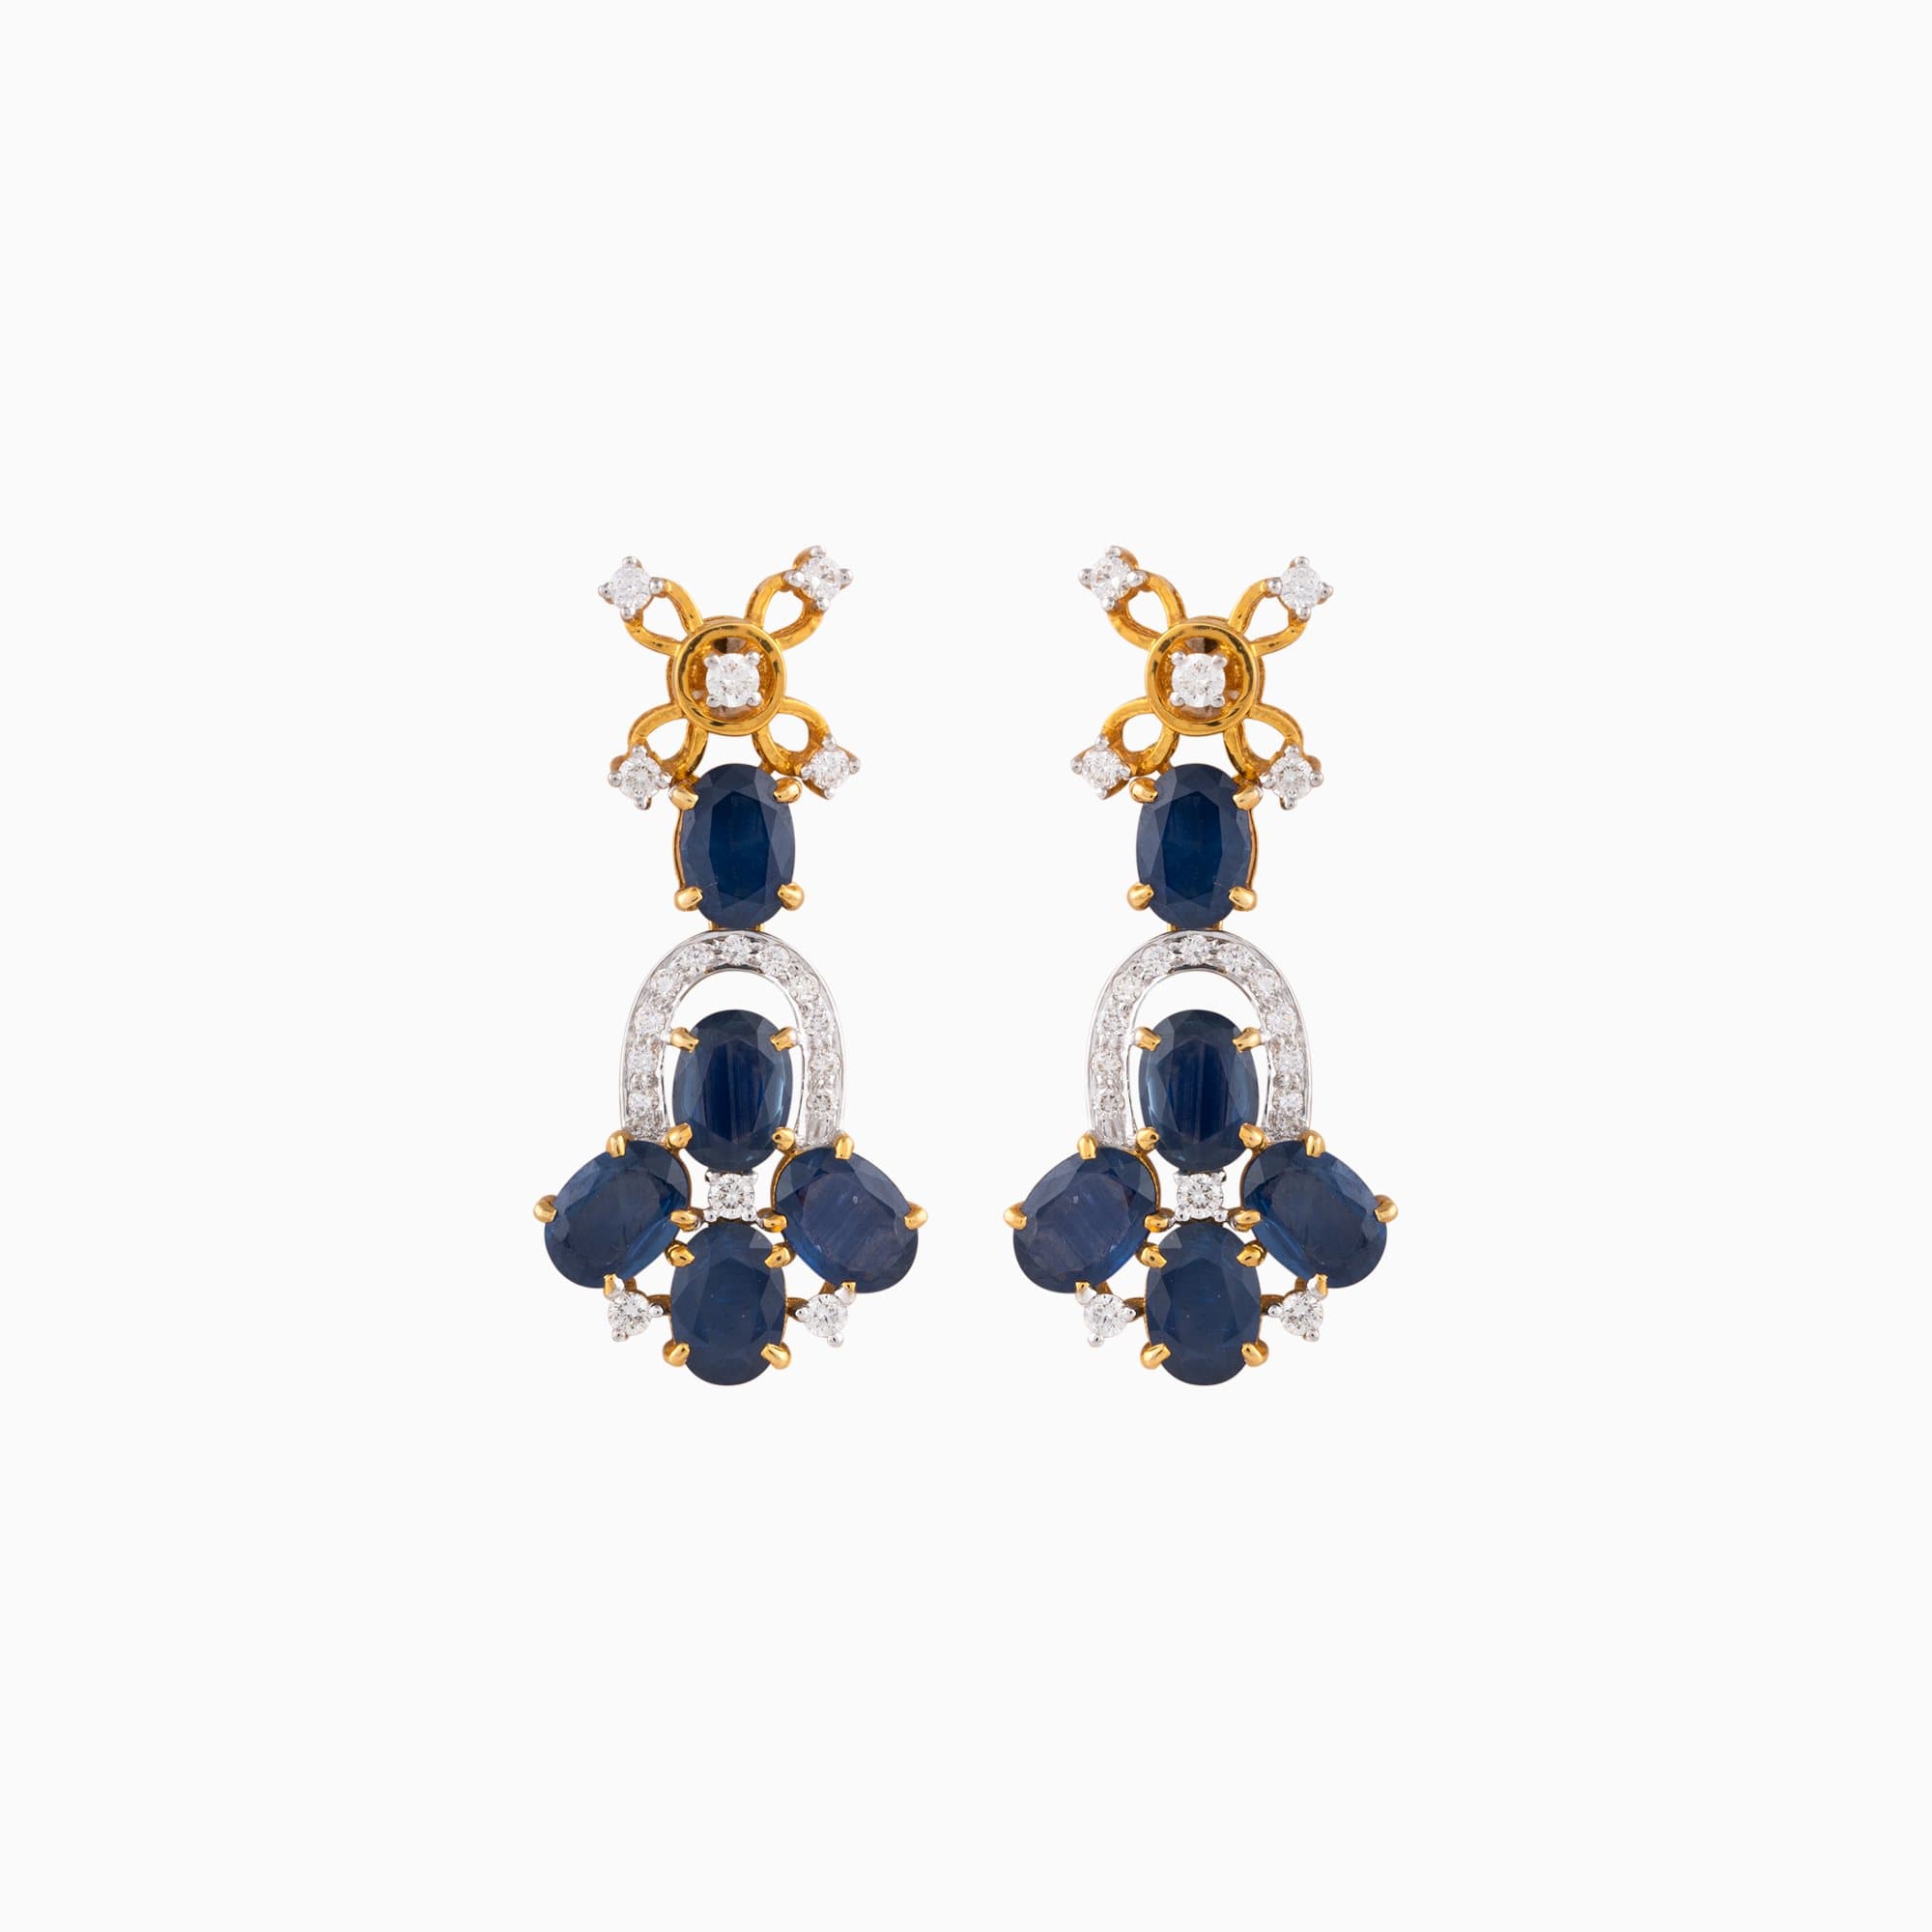 Earring Pair with Round Cut Diamond and Oval Cut Blue Sapphire - WDN865